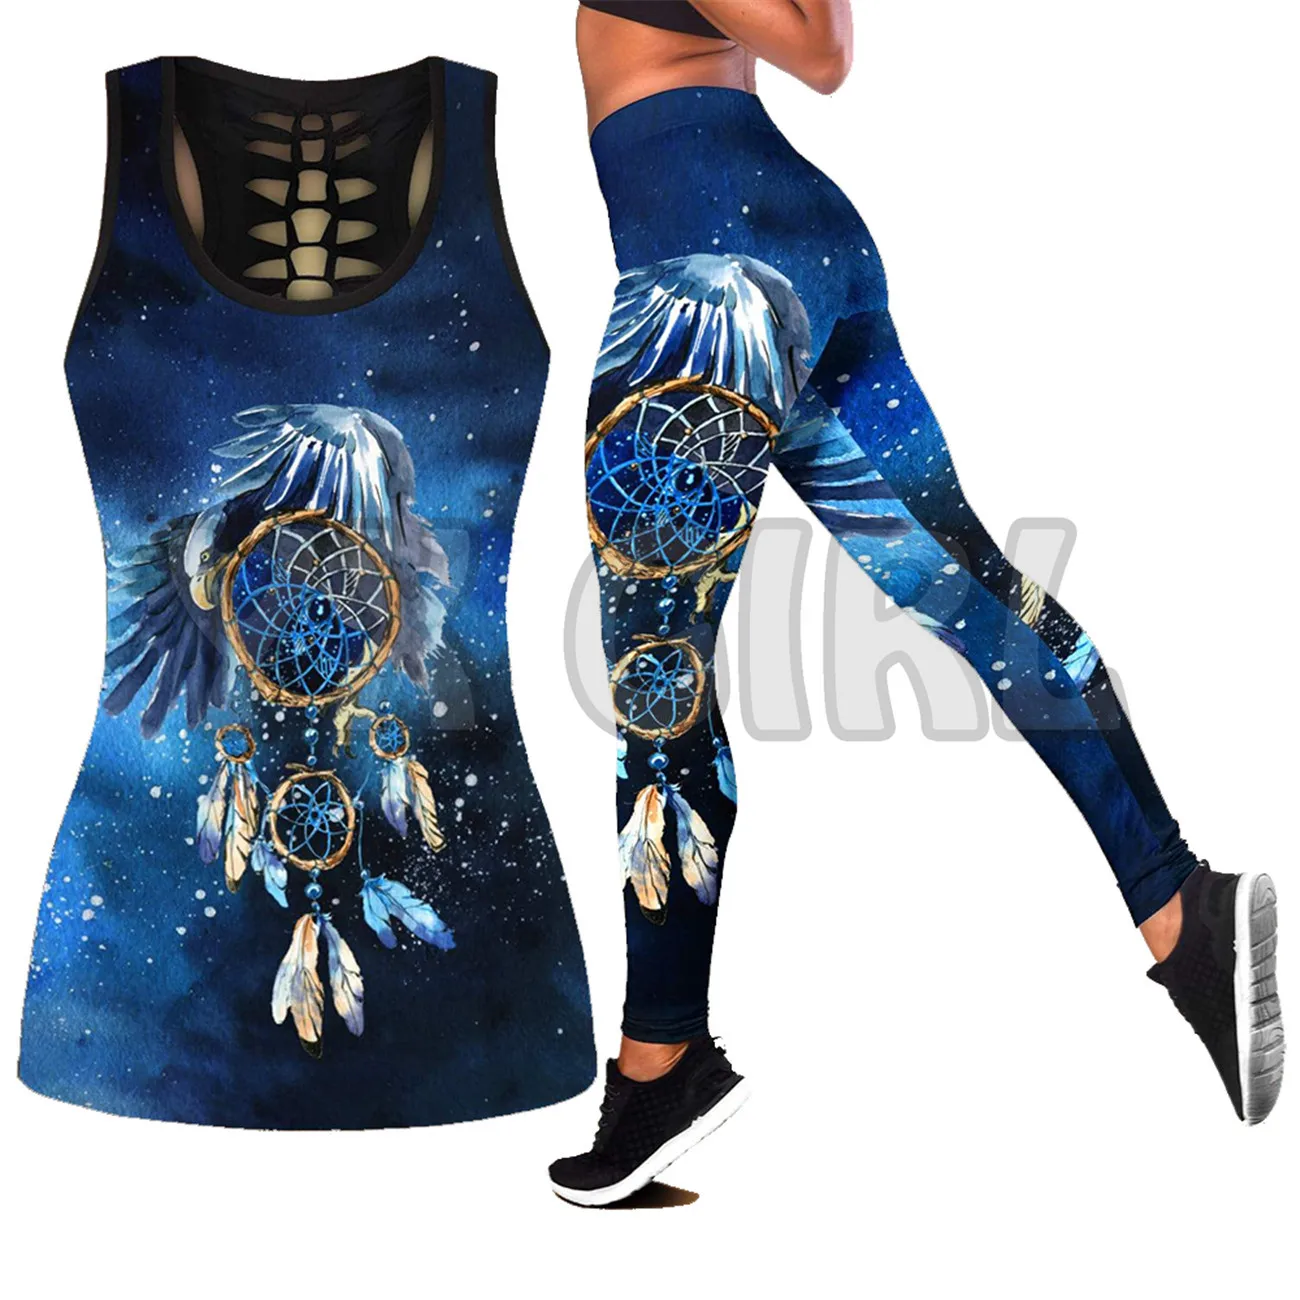 Native Feather  3D Printed Tank Top+Legging Combo Outfit Yoga Fitness Legging Women